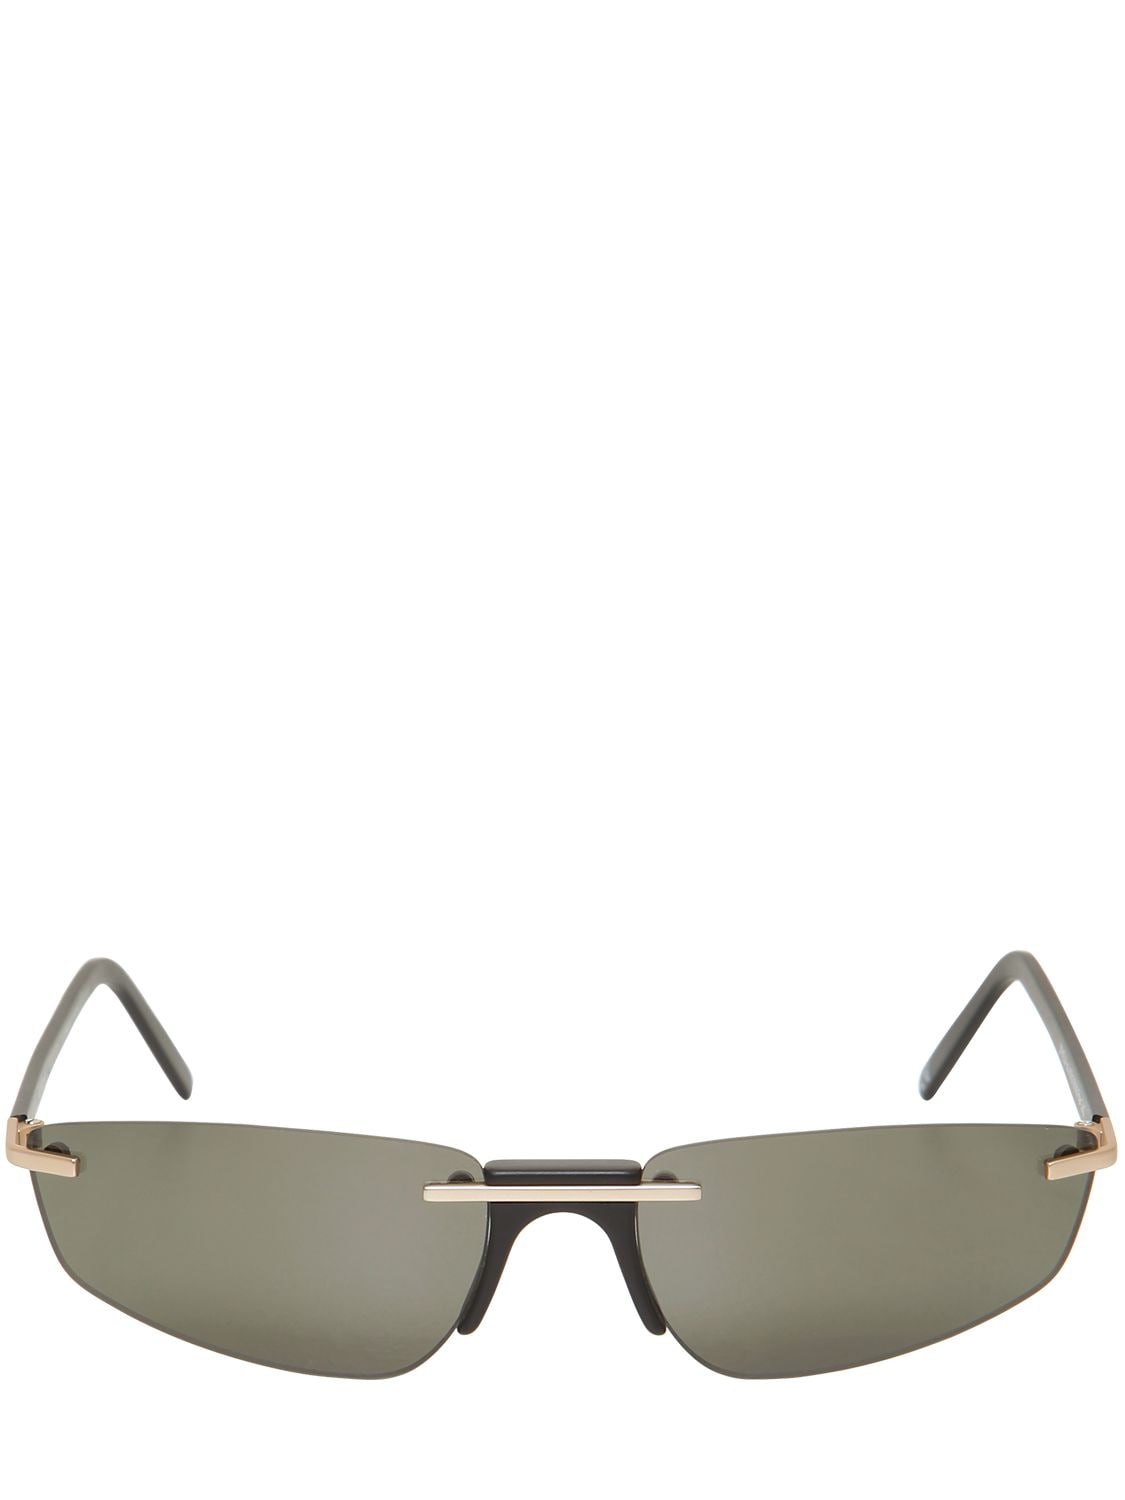 Andy Wolf Ophelia Frameless Sunglasses In Black